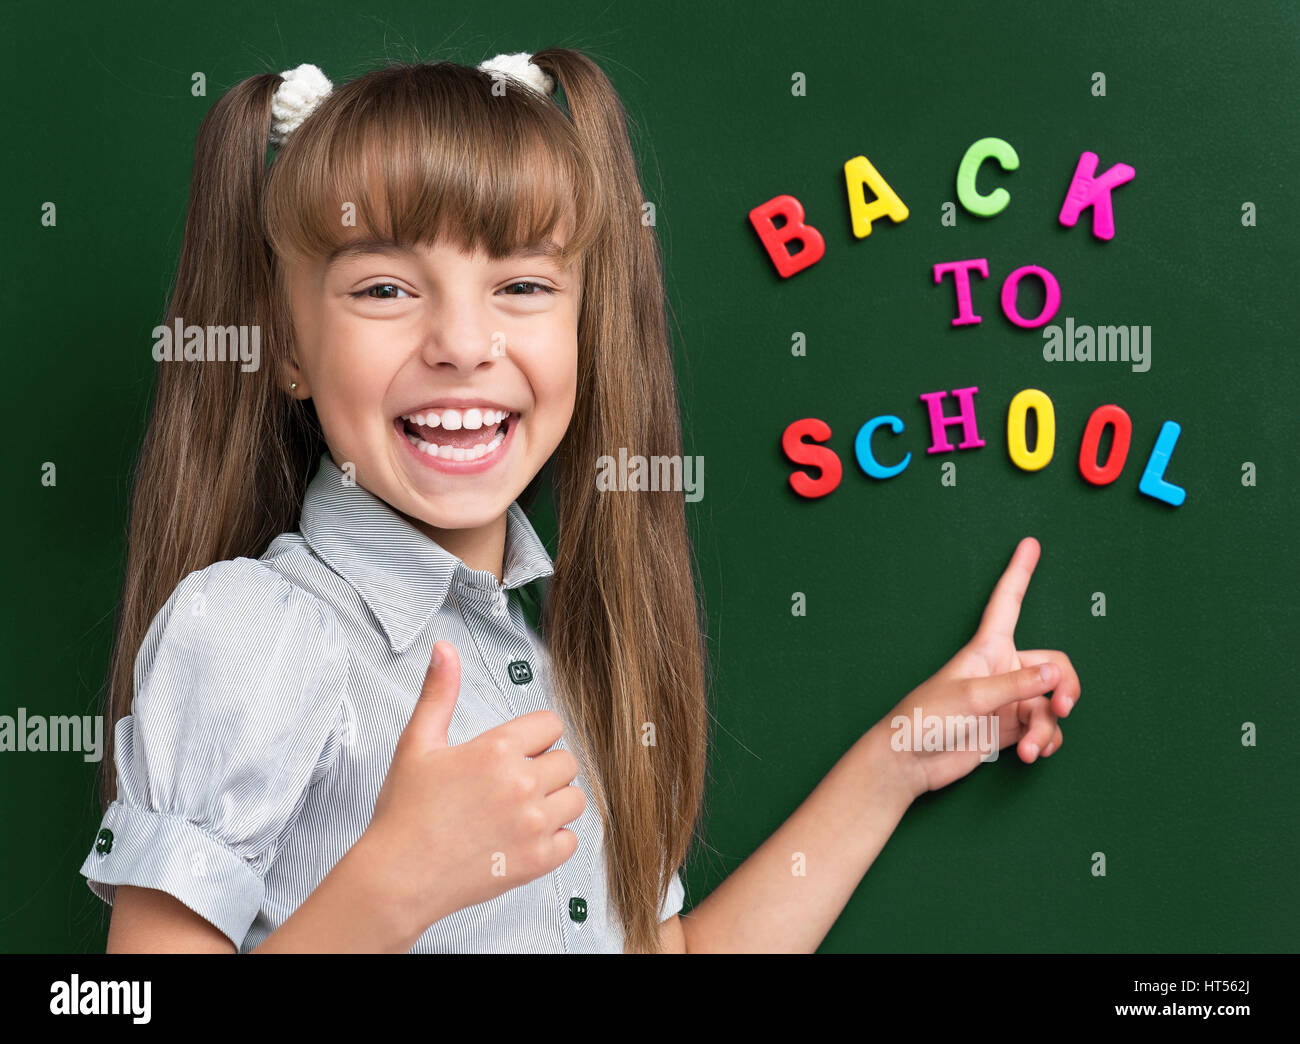 Portrait of adorable young girl showing thumb up sign at the green chalkboard in classroom. Stock Photo